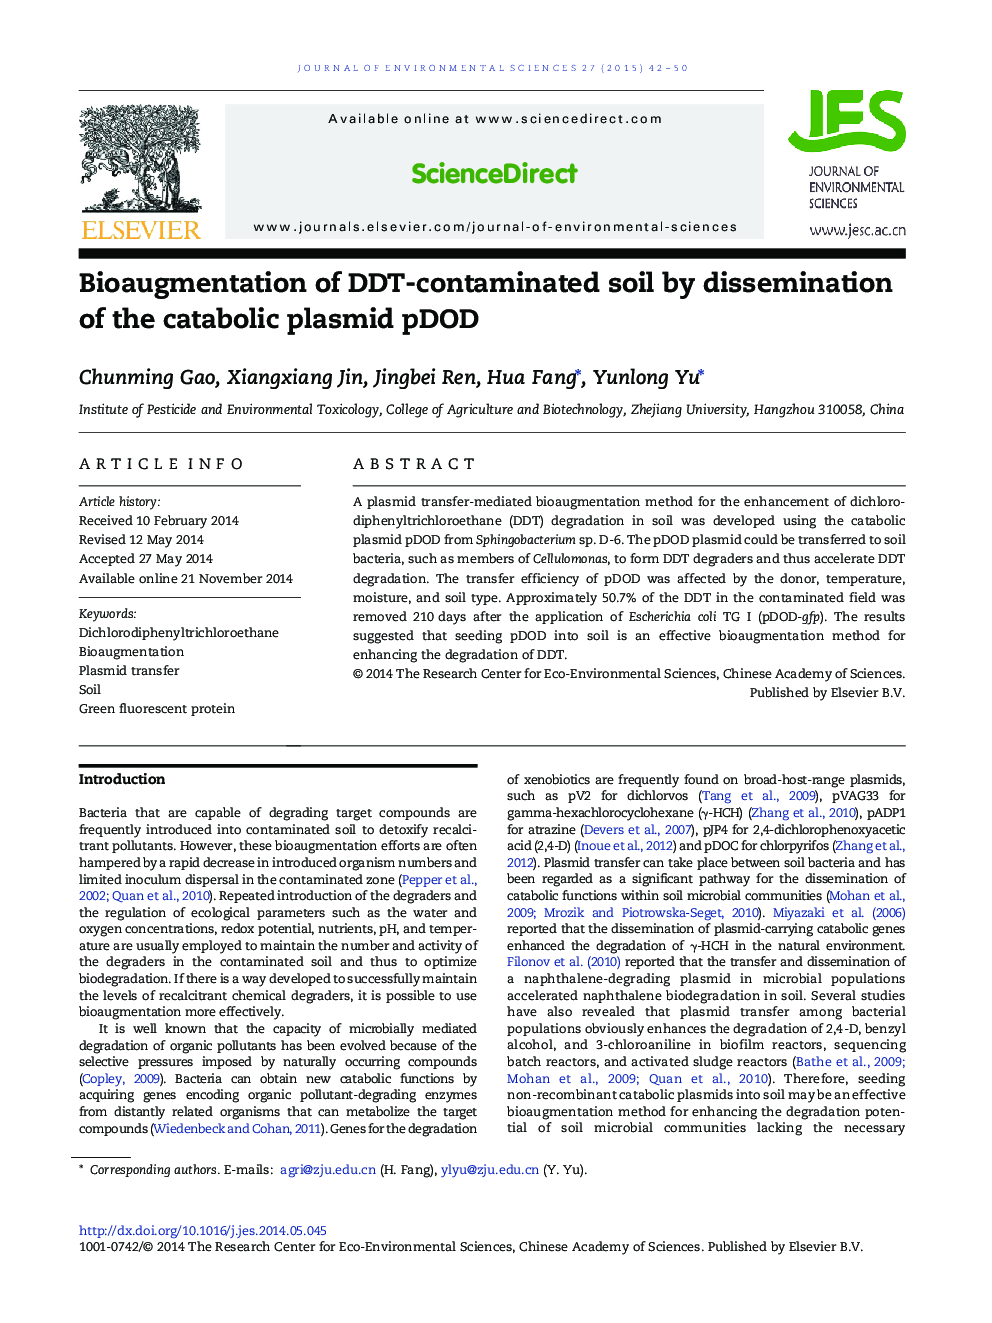 Bioaugmentation of DDT-contaminated soil by dissemination of the catabolic plasmid pDOD